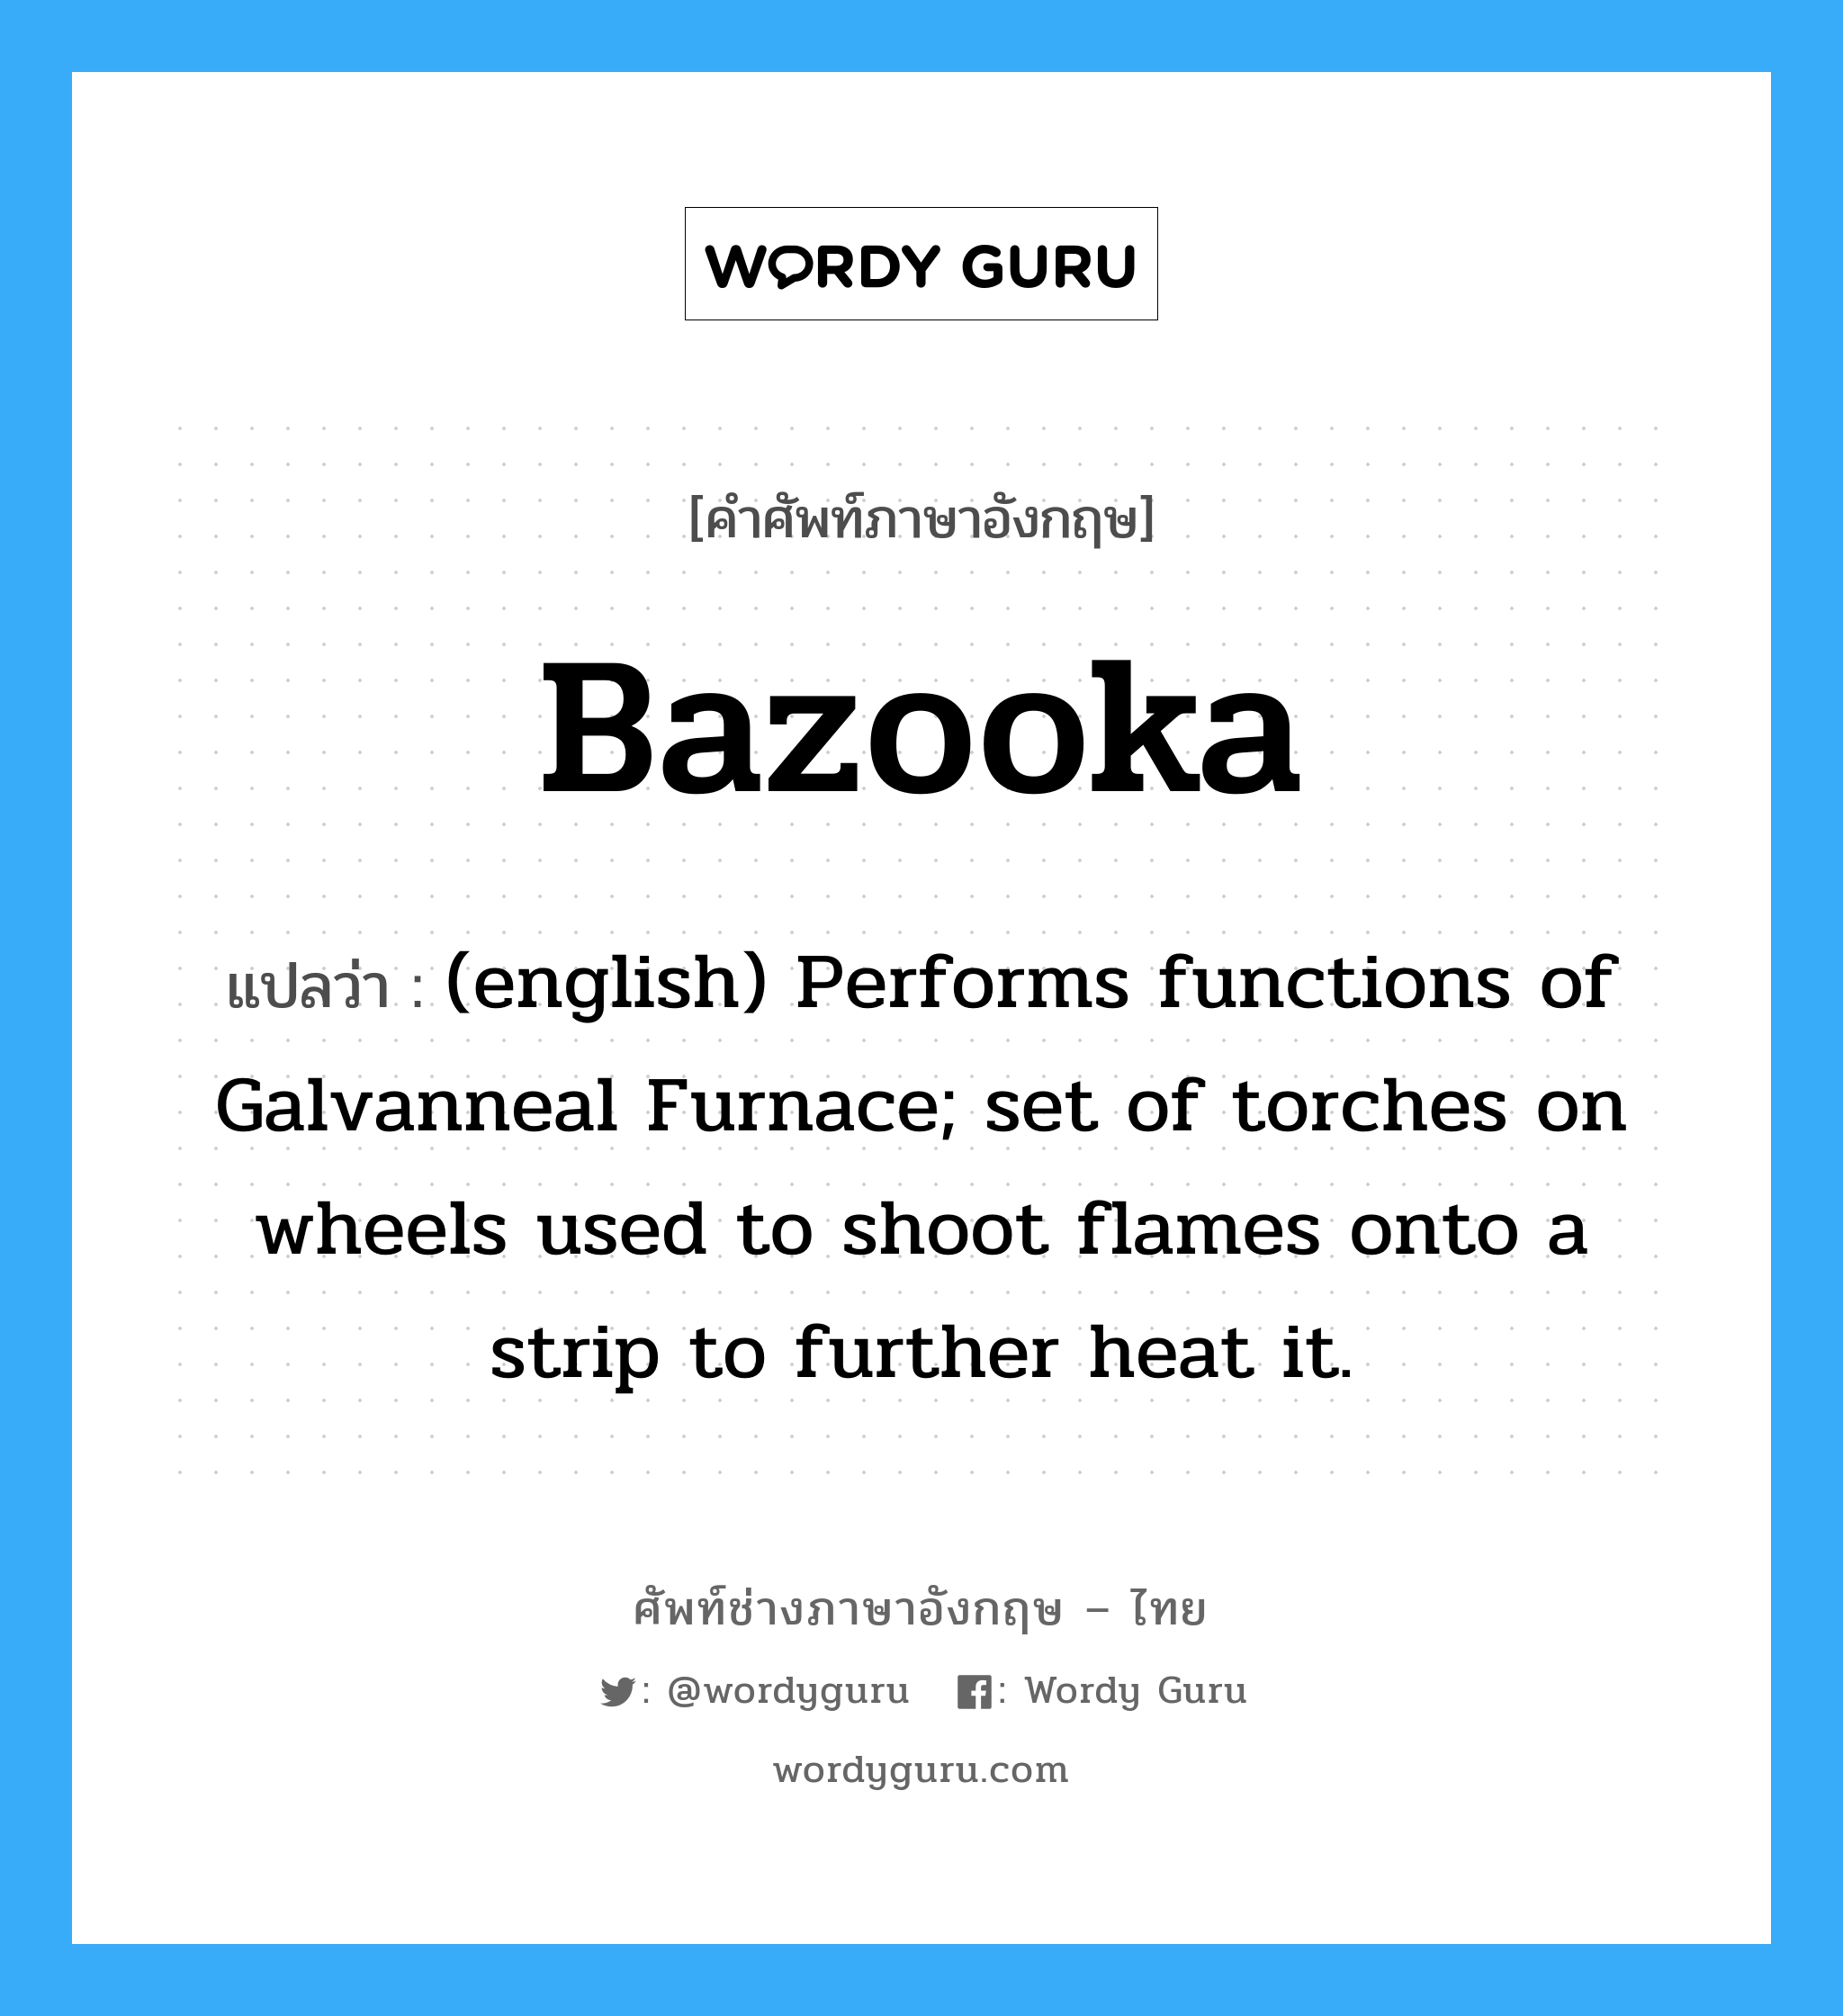 Bazooka แปลว่า?, คำศัพท์ช่างภาษาอังกฤษ - ไทย Bazooka คำศัพท์ภาษาอังกฤษ Bazooka แปลว่า (english) Performs functions of Galvanneal Furnace; set of torches on wheels used to shoot flames onto a strip to further heat it.